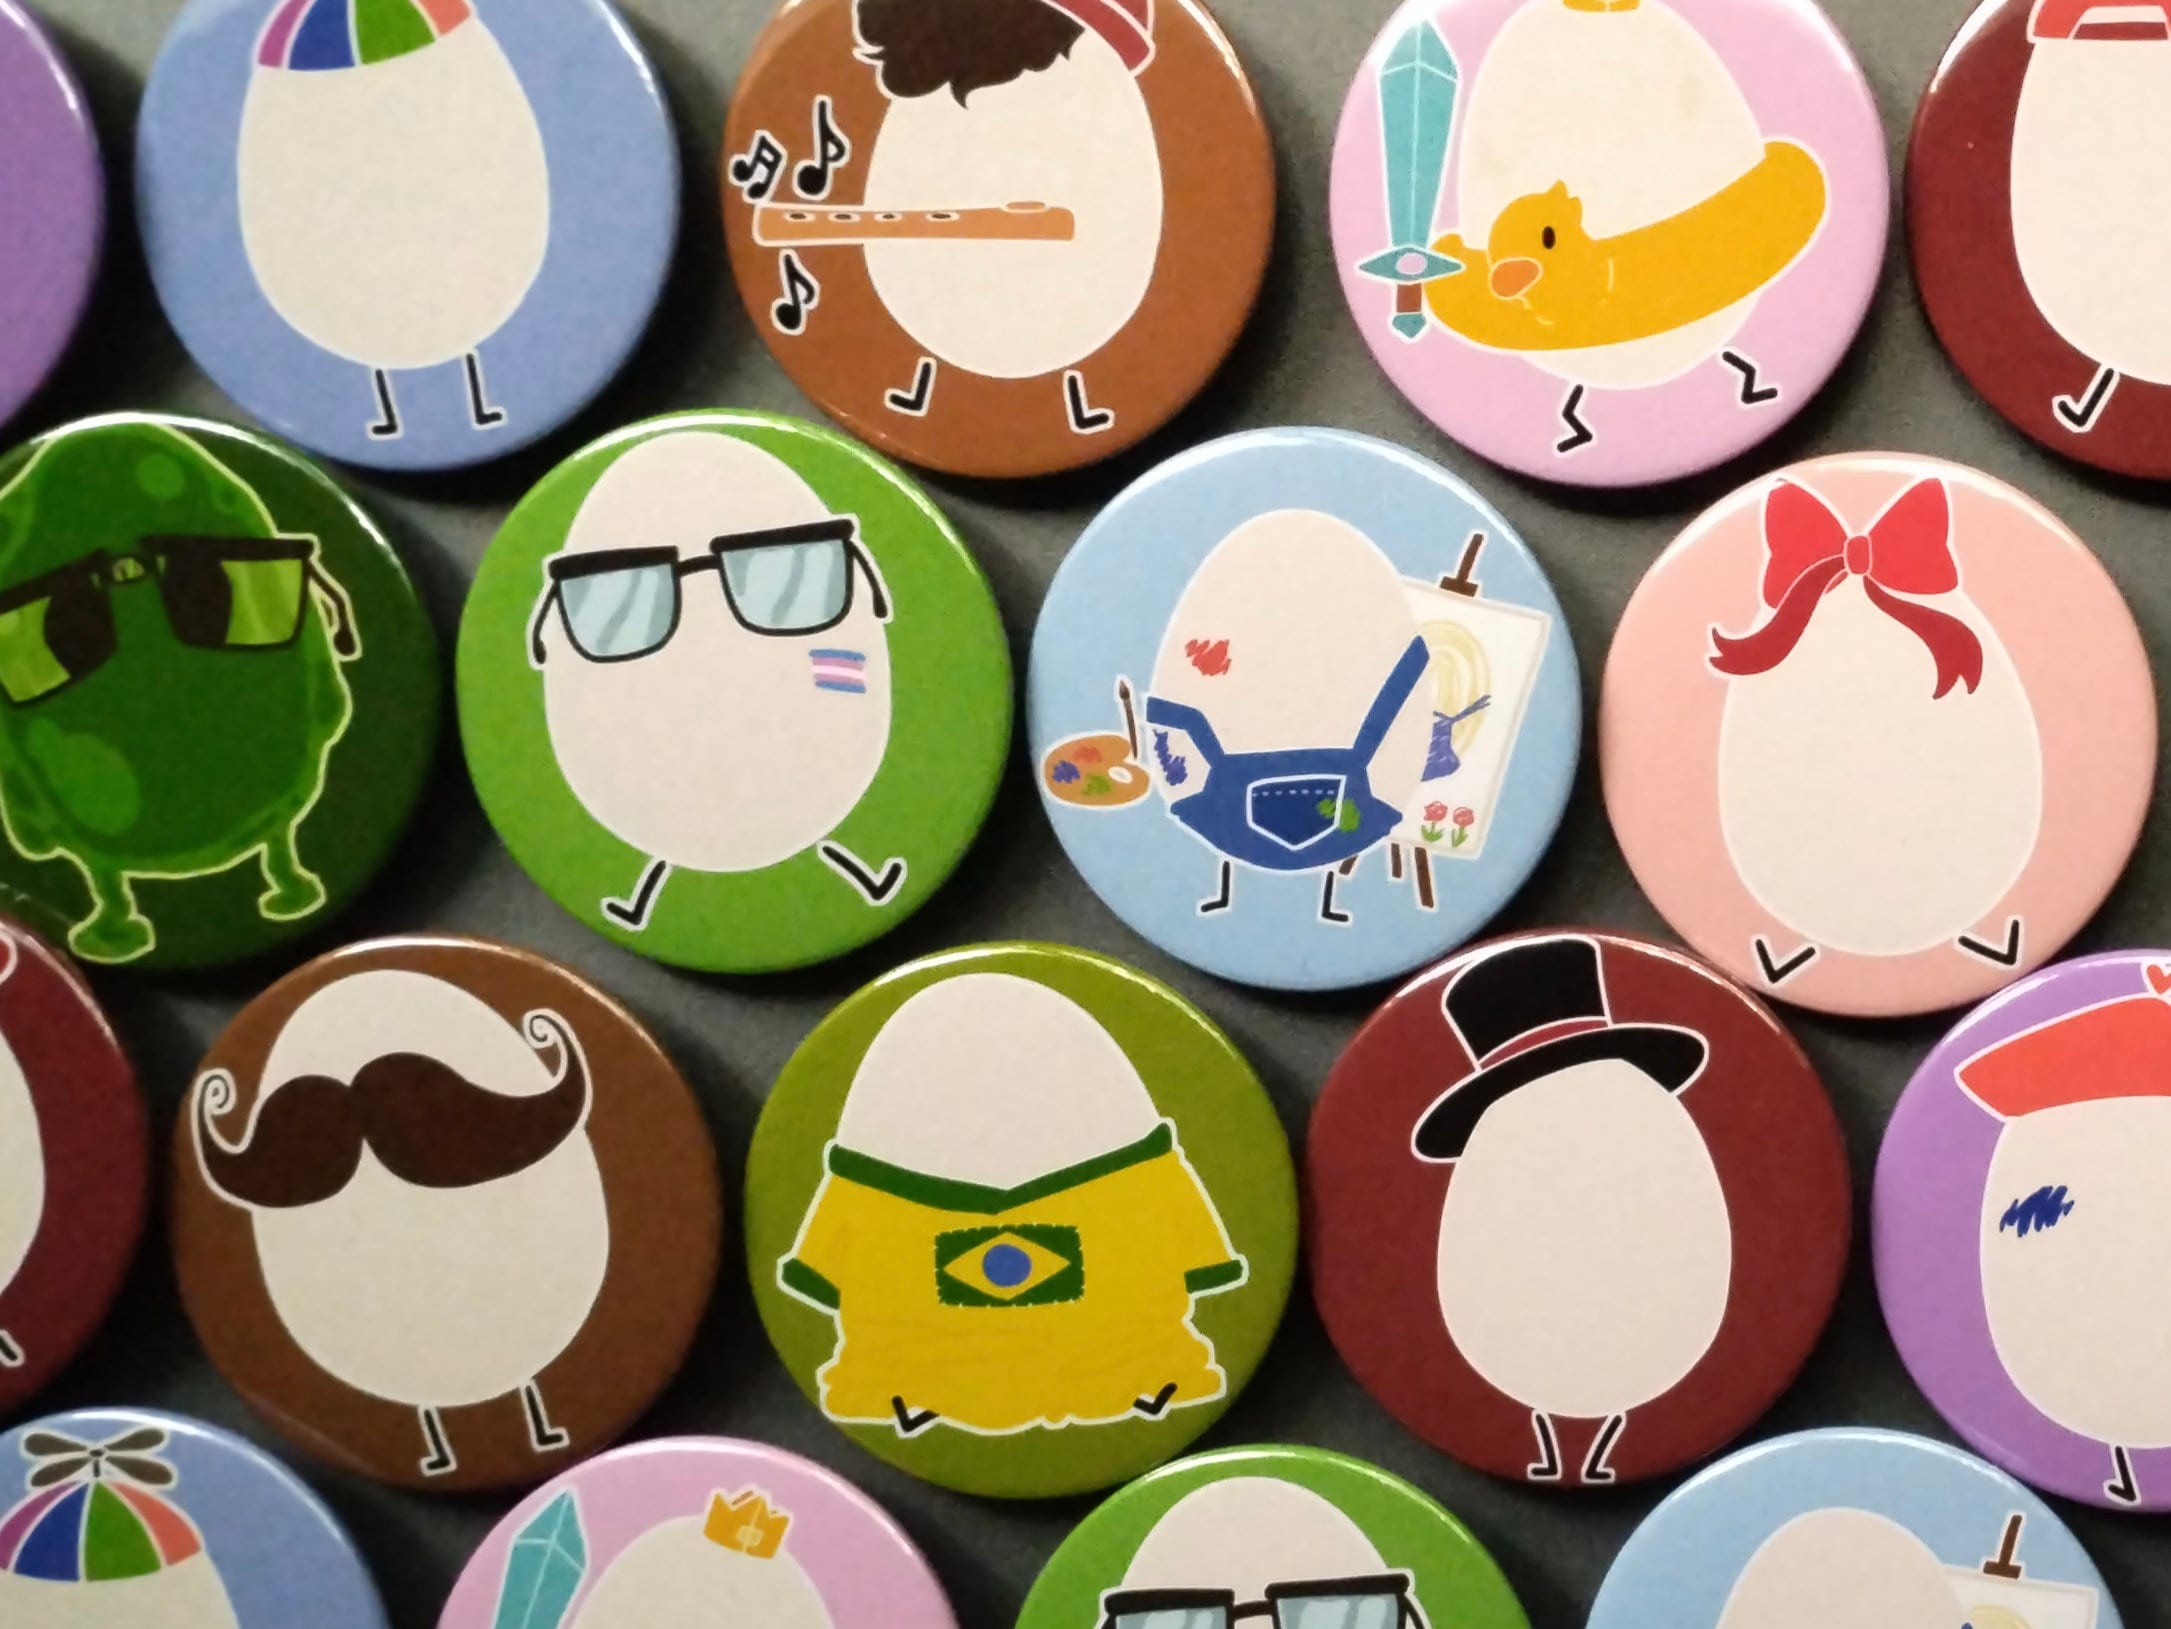 Qsmp Eggs Projects  Photos, videos, logos, illustrations and